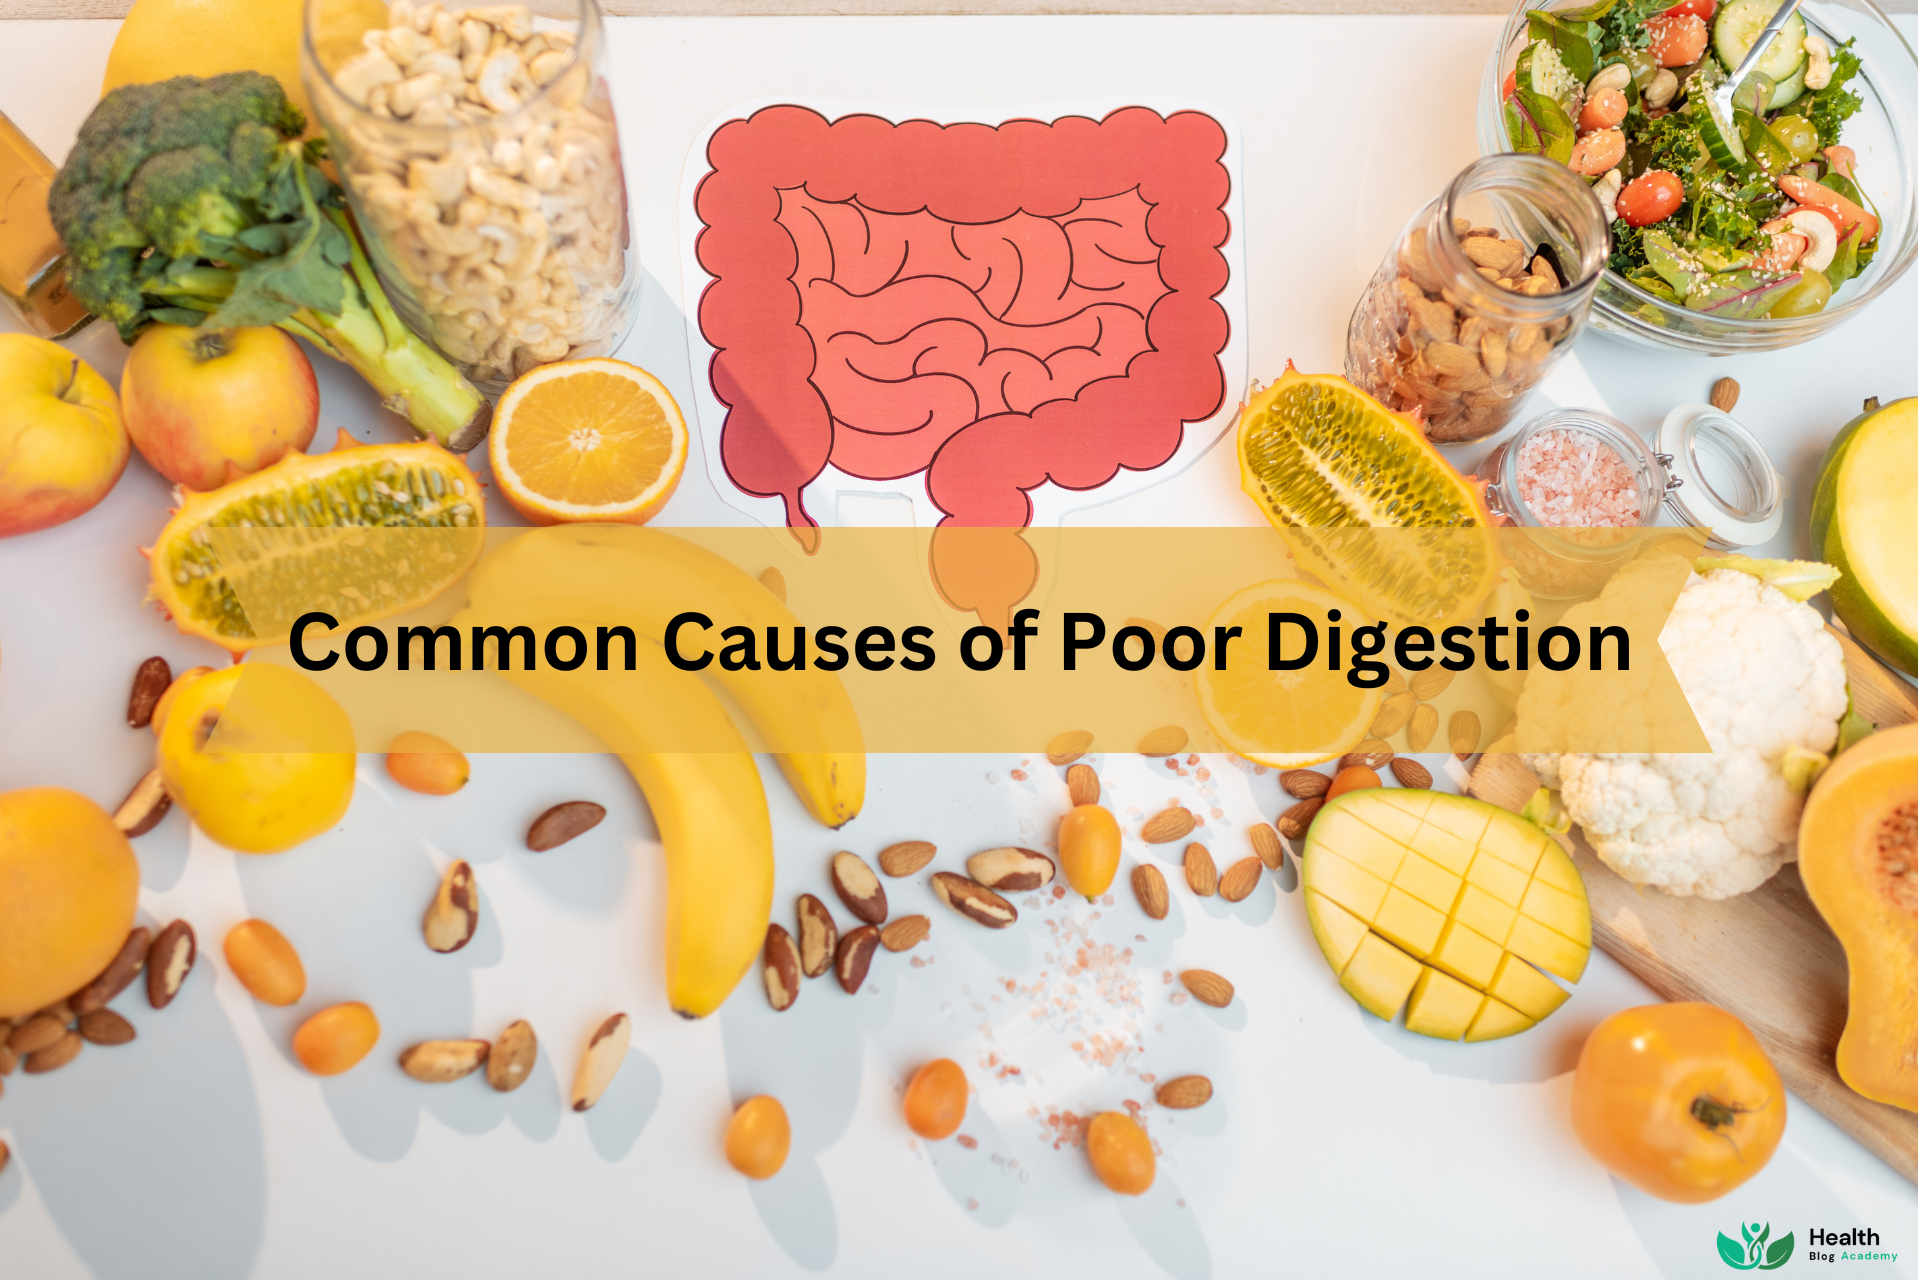 Common Causes of Poor Digestion